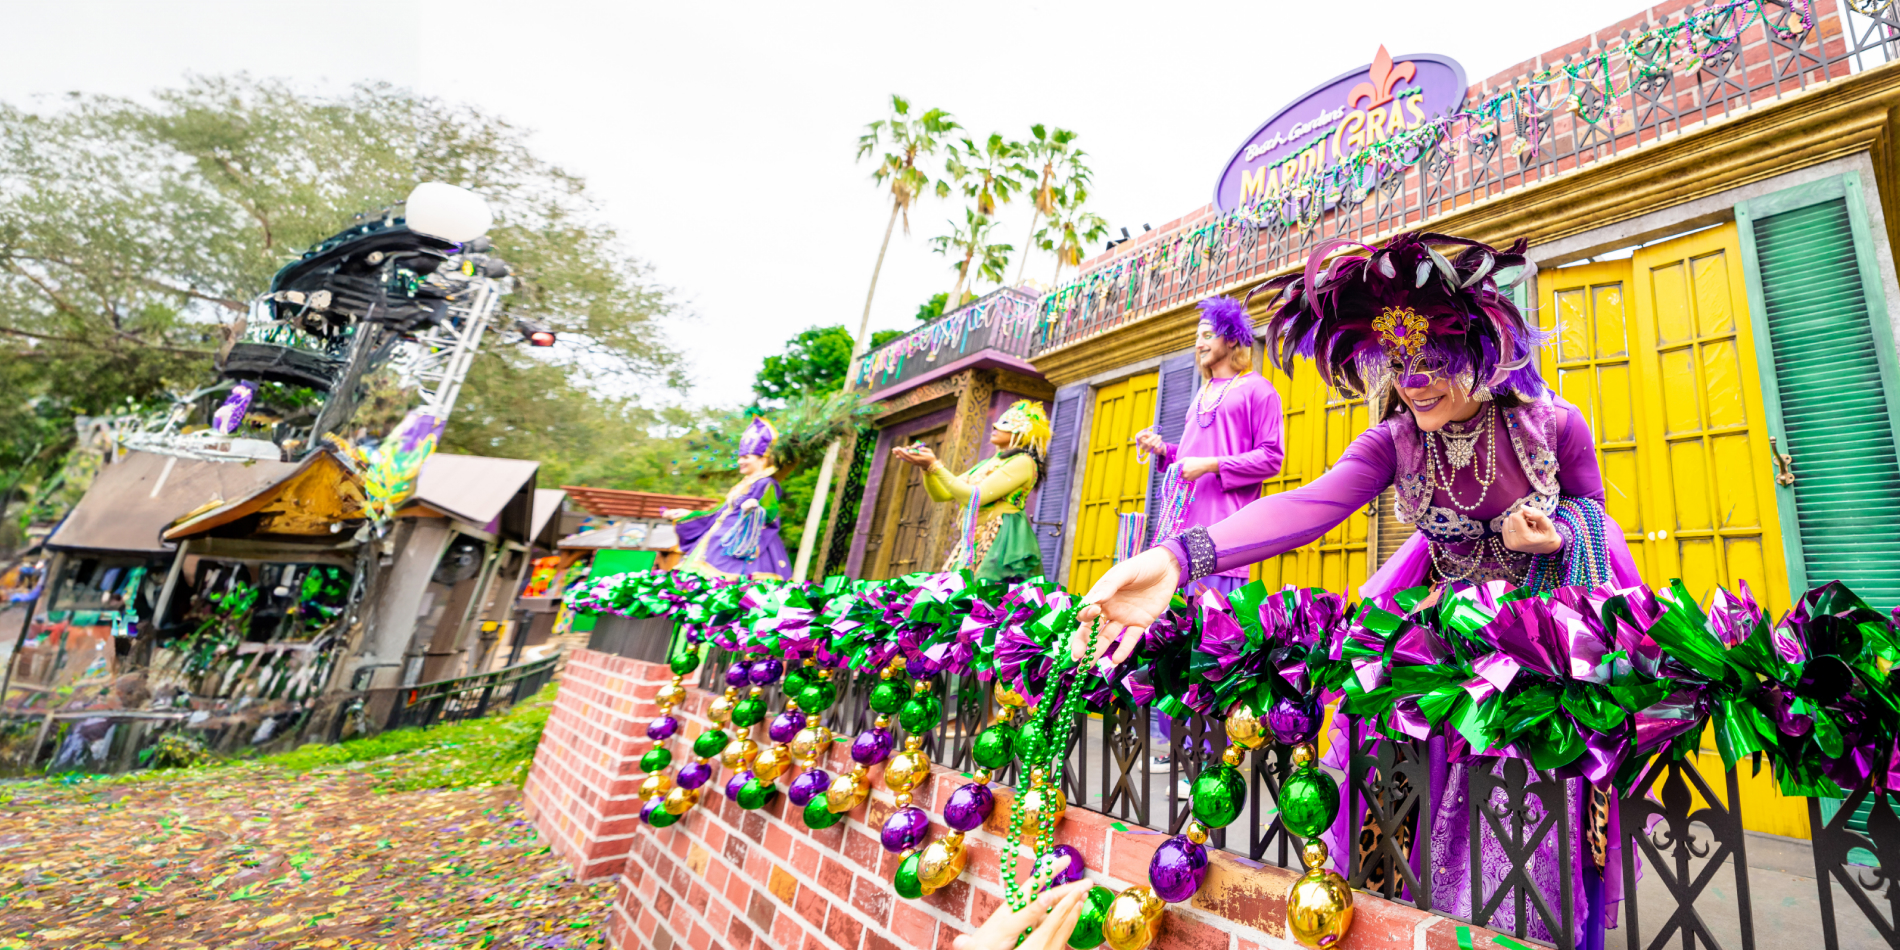 Friends visiting "Bead Balcony" for an opportunity to catch beads and celebrate at Busch Gardens Tampa Bay Mardi Gras.